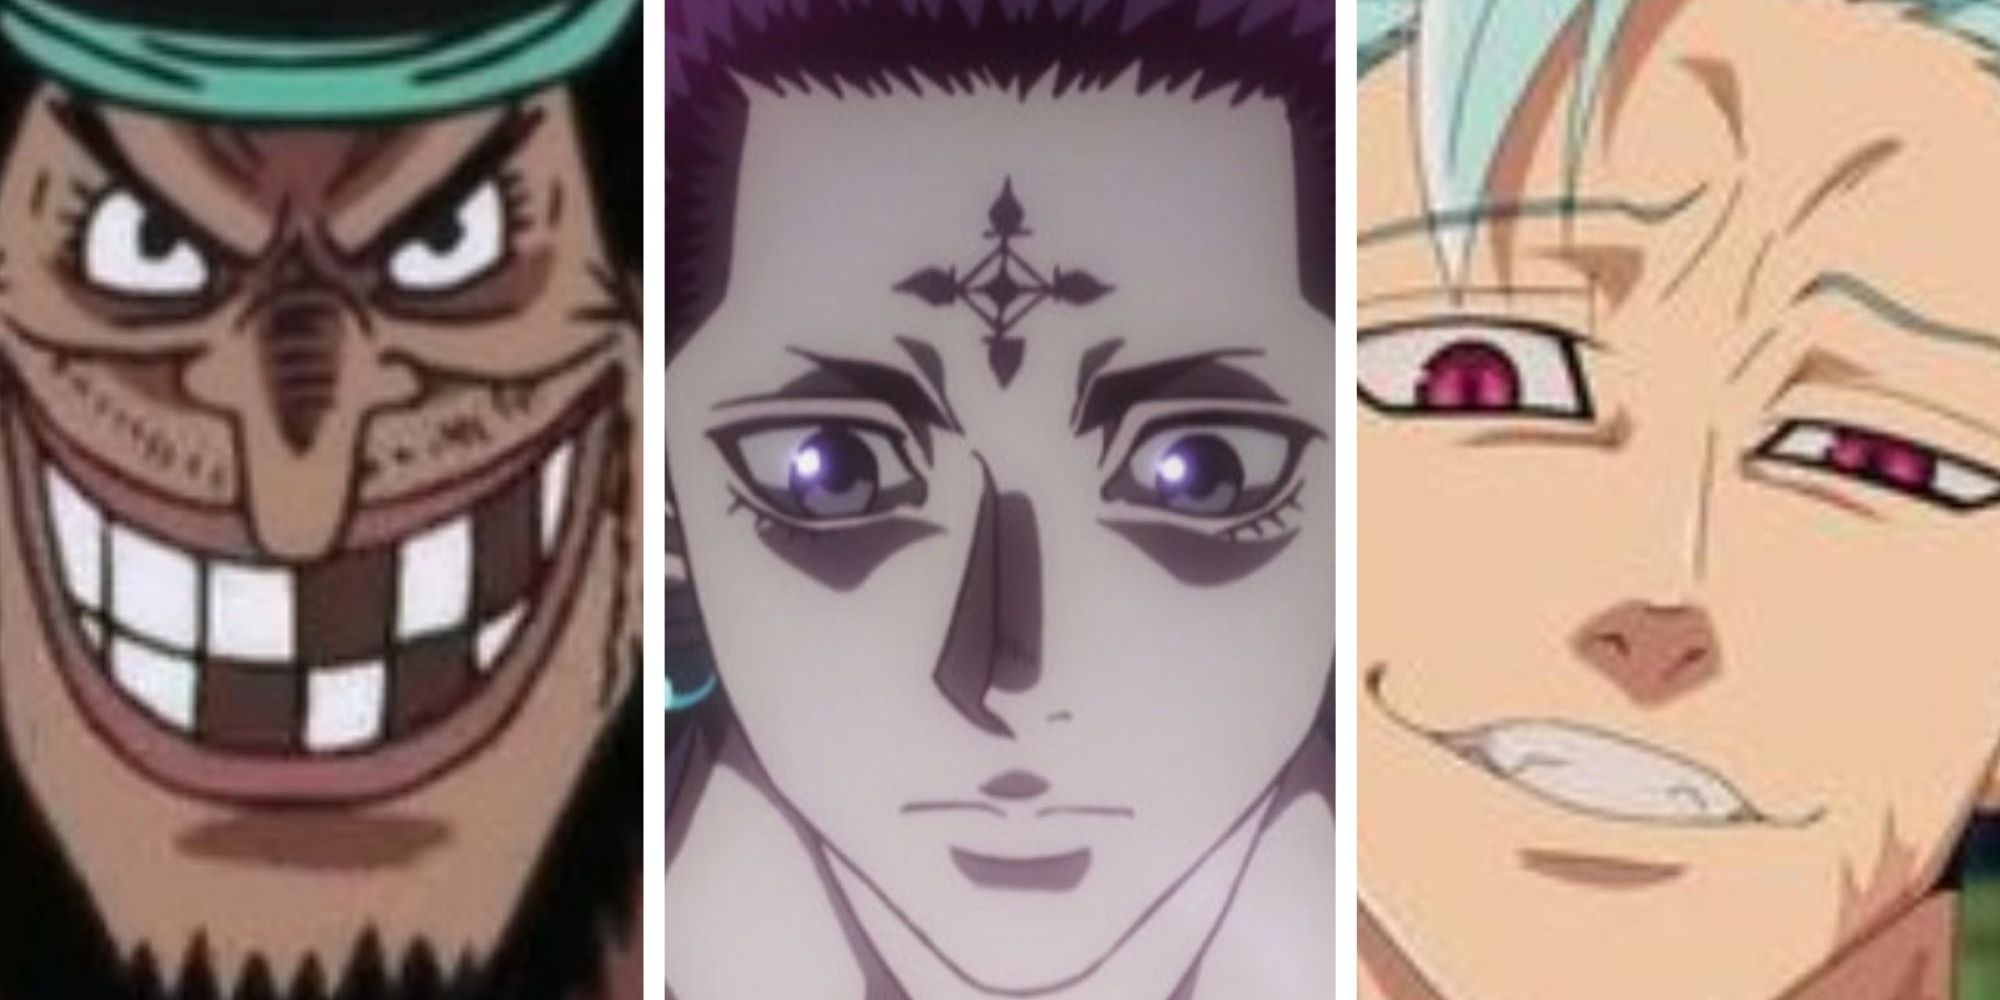 Blackbeard from One Piece, Chrollo Lucilfer from HxH, Ban from The Seven Deadly Sins